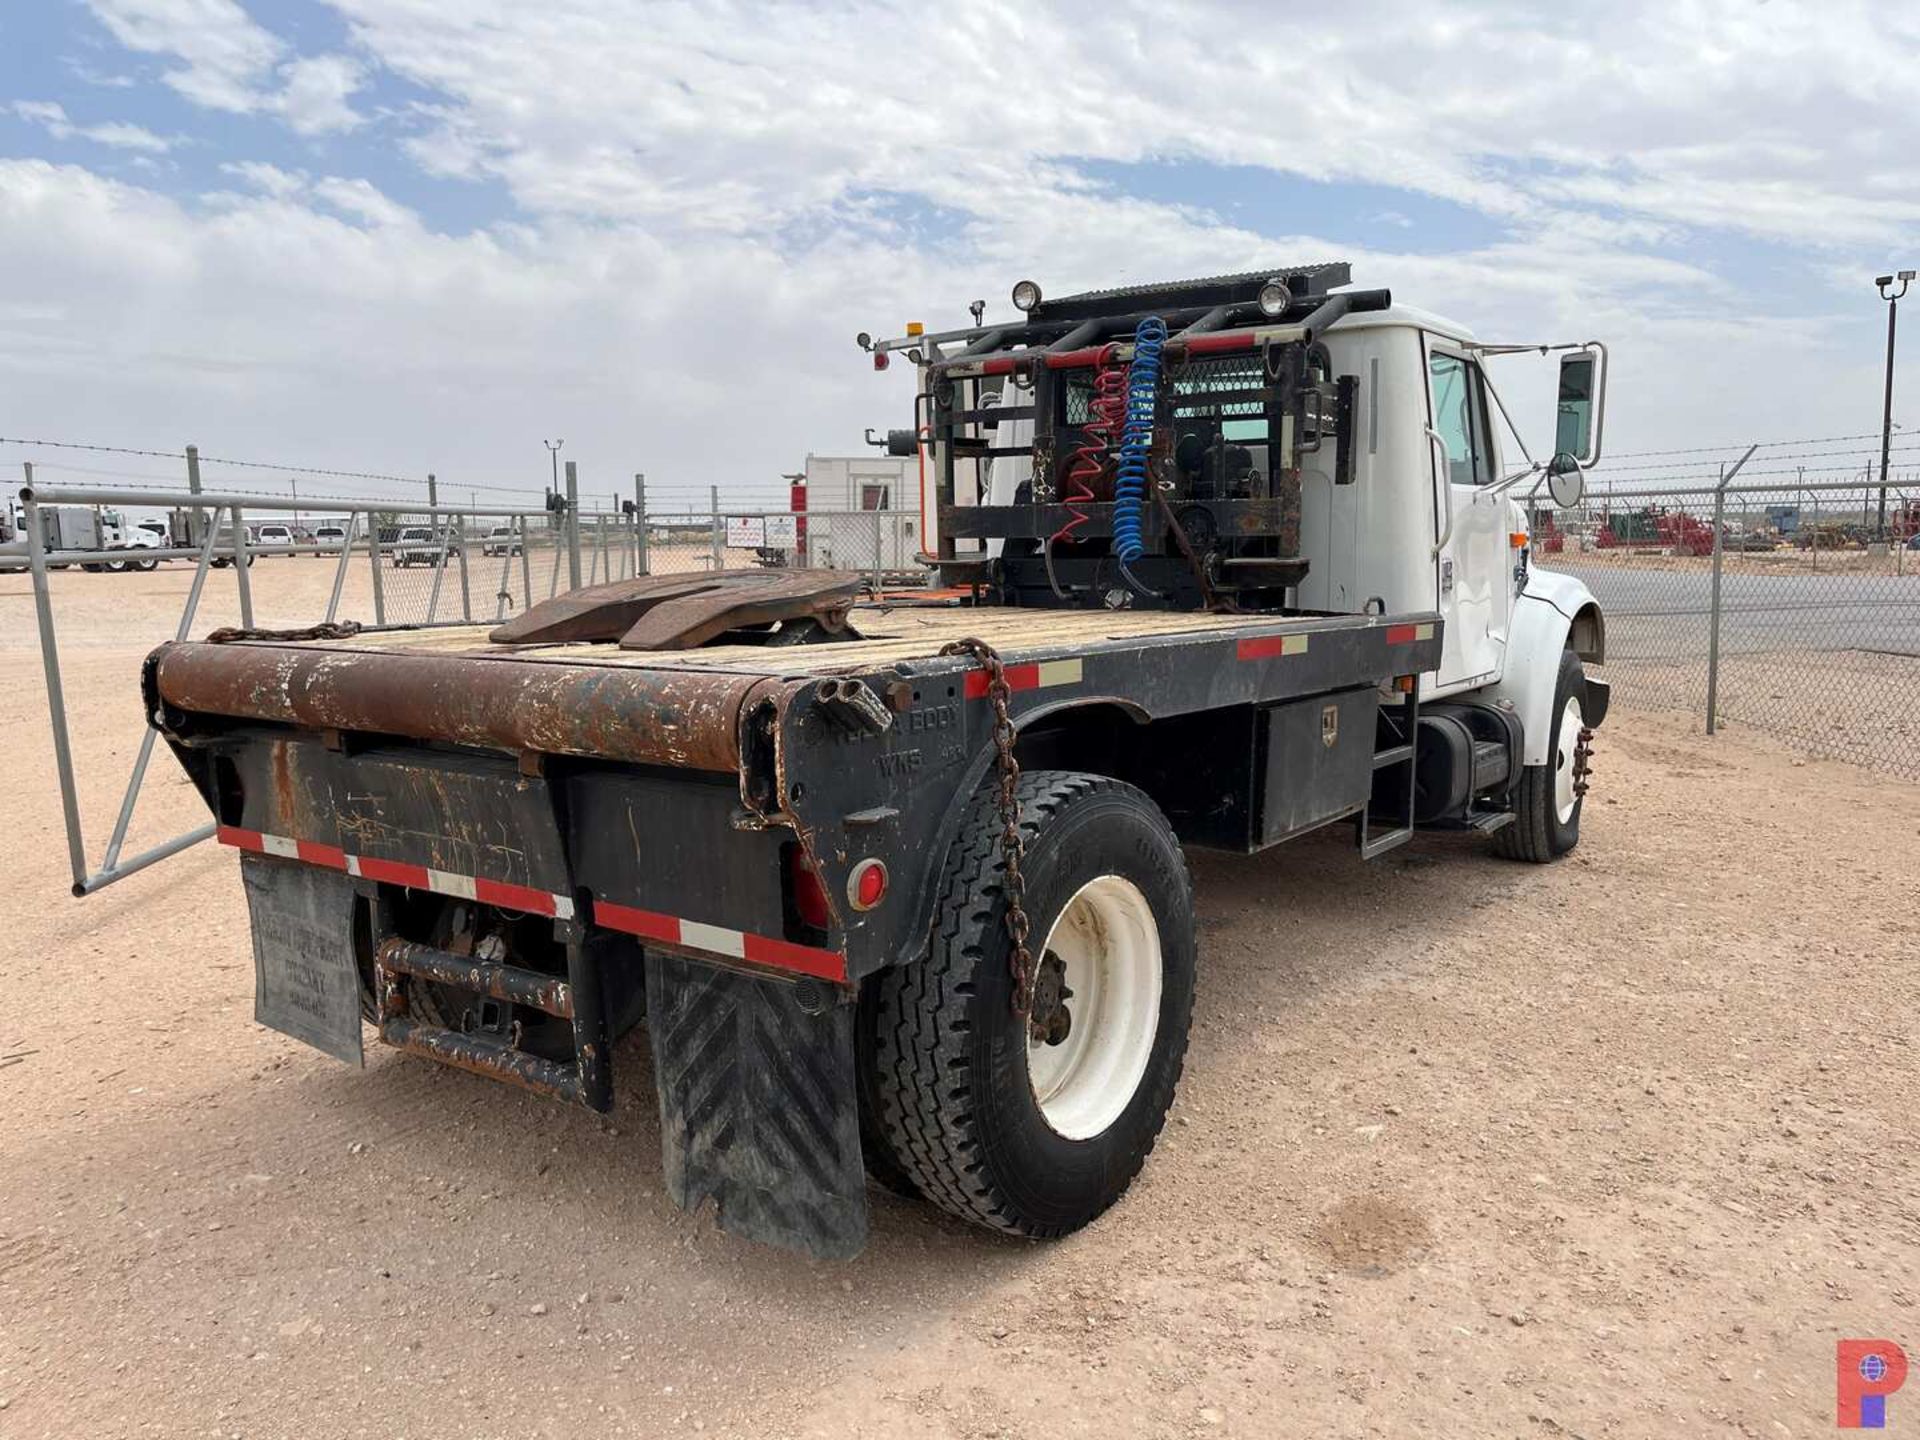 2000 INTERNATIONAL 4900 4X2 S/A DAYCAB WINCH TRUCK - Image 3 of 9